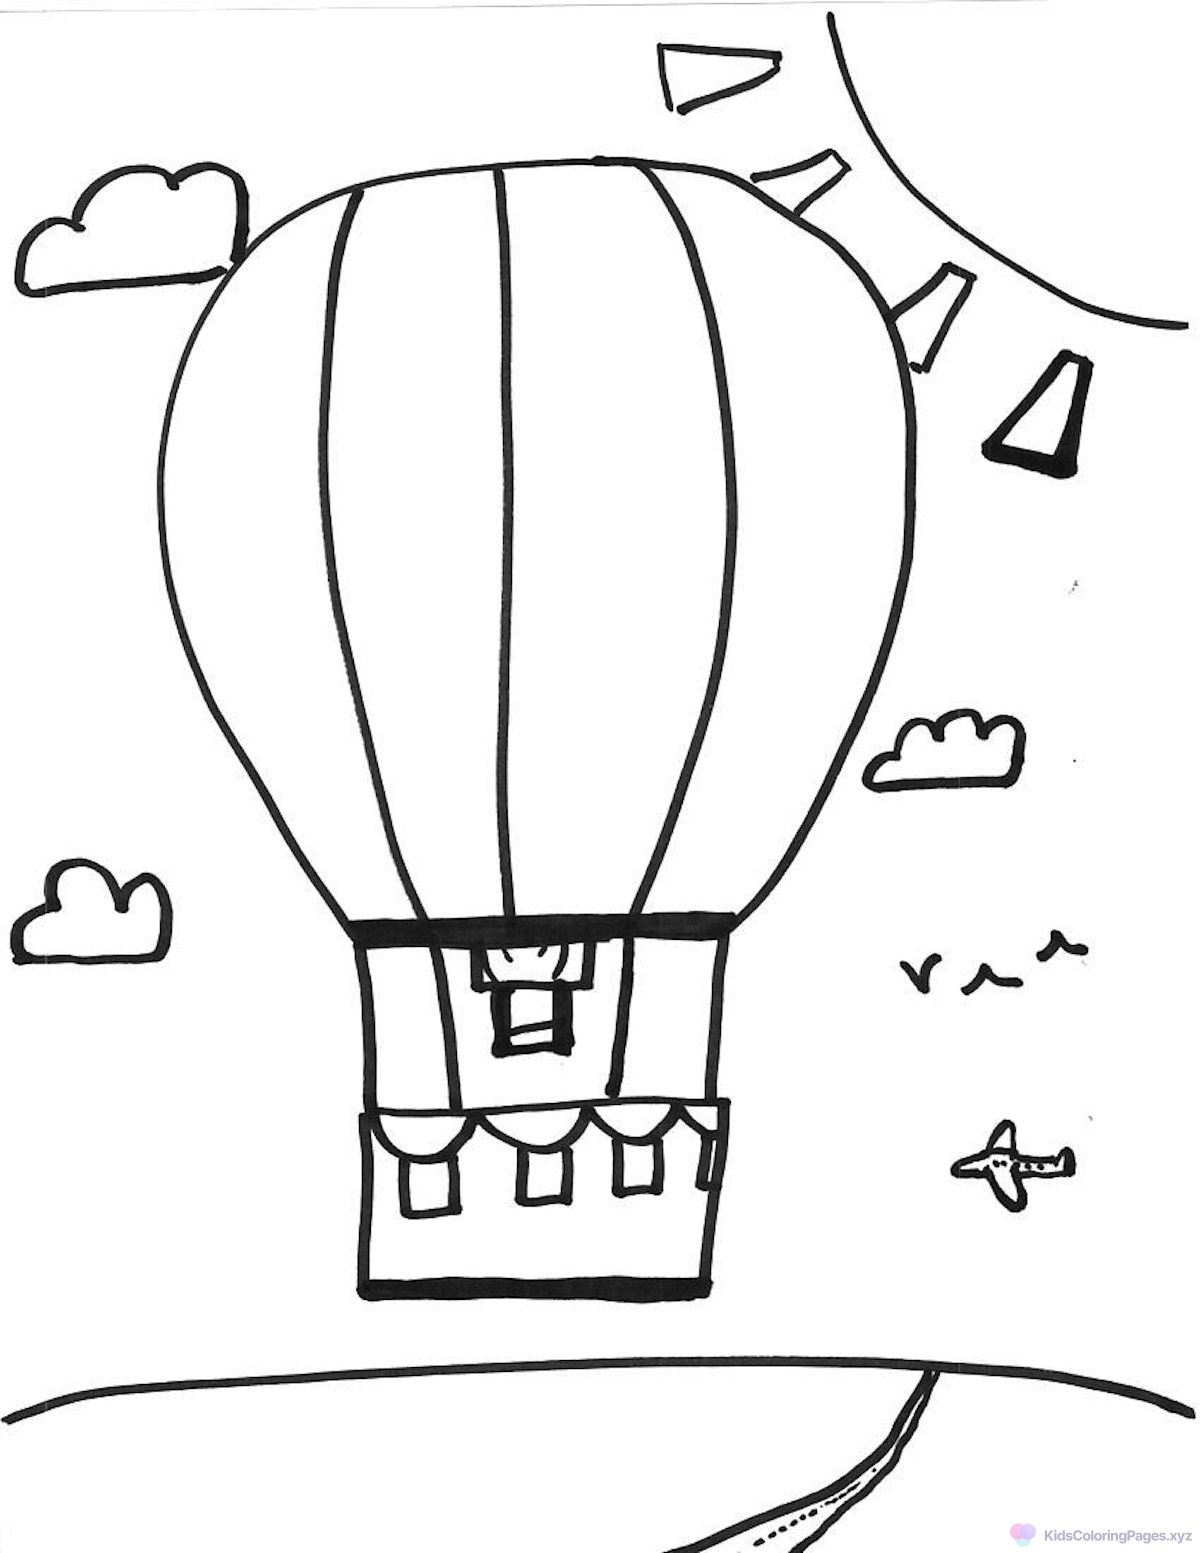 Hot Air Balloon coloring page for printing